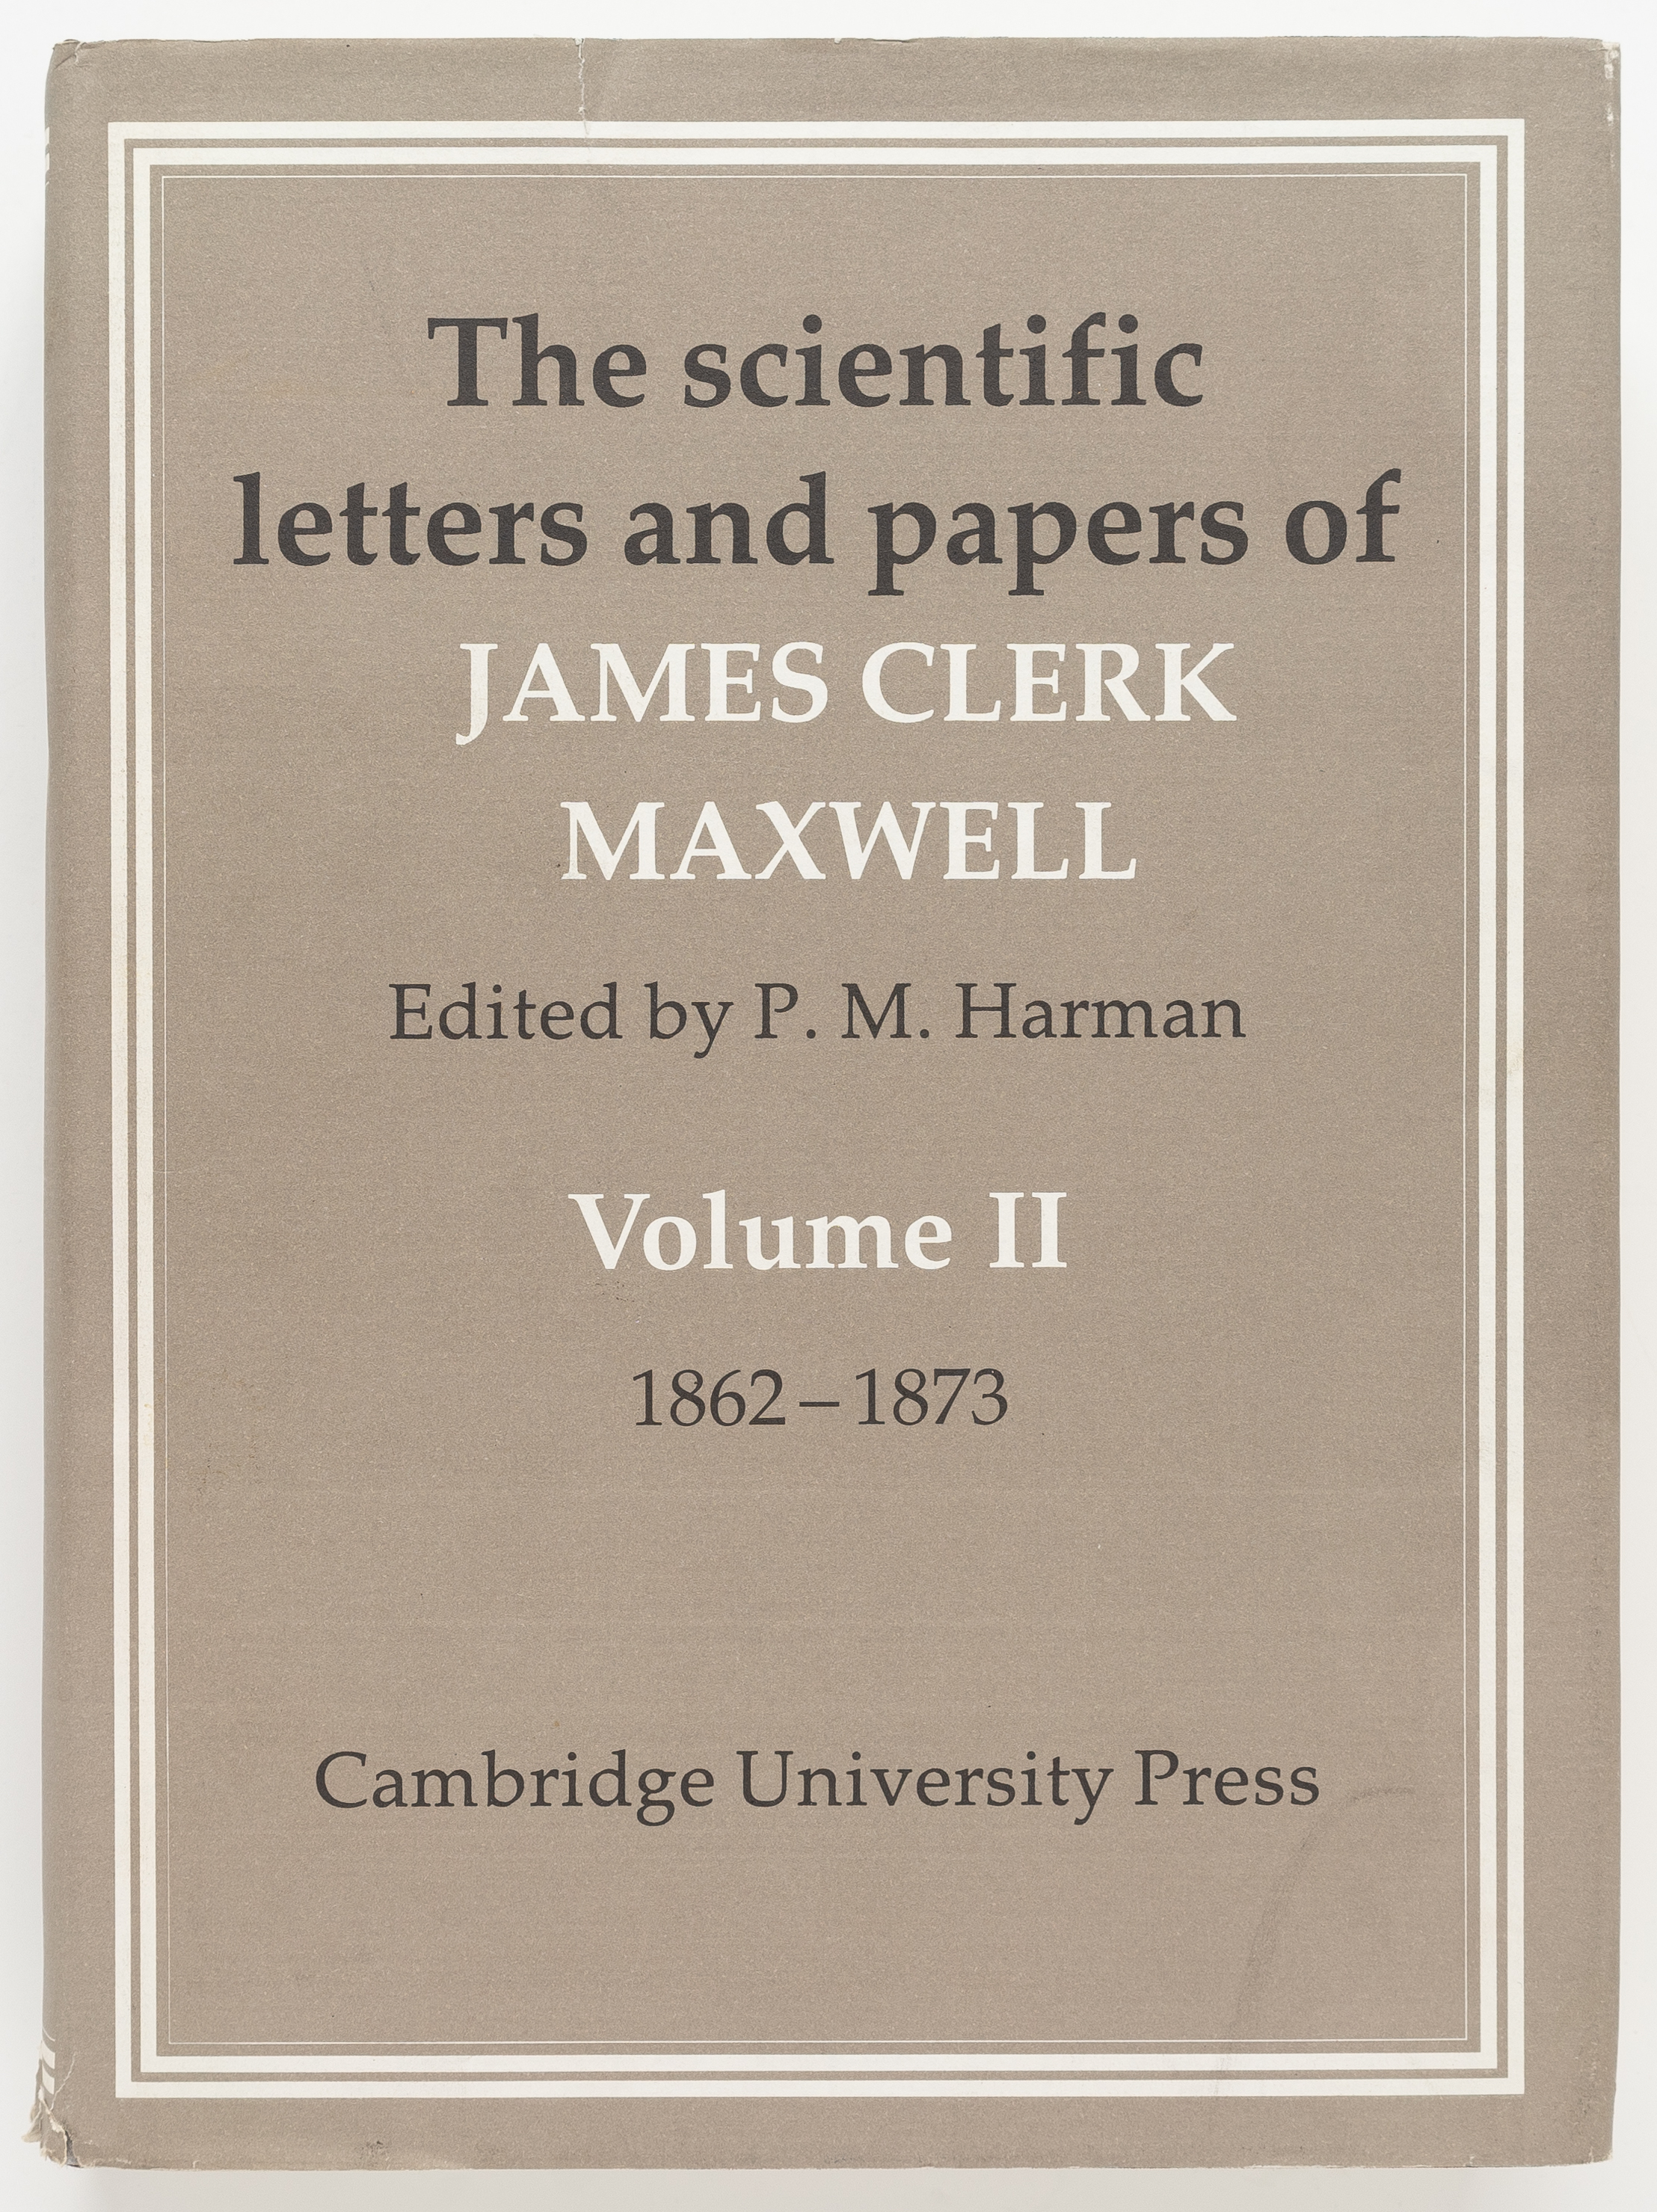 The Scientific Letters and Papers of James Clerk Maxwell, Volume II: 1862-1873 - James Clerk Maxwell (edited by P. M. Harman)